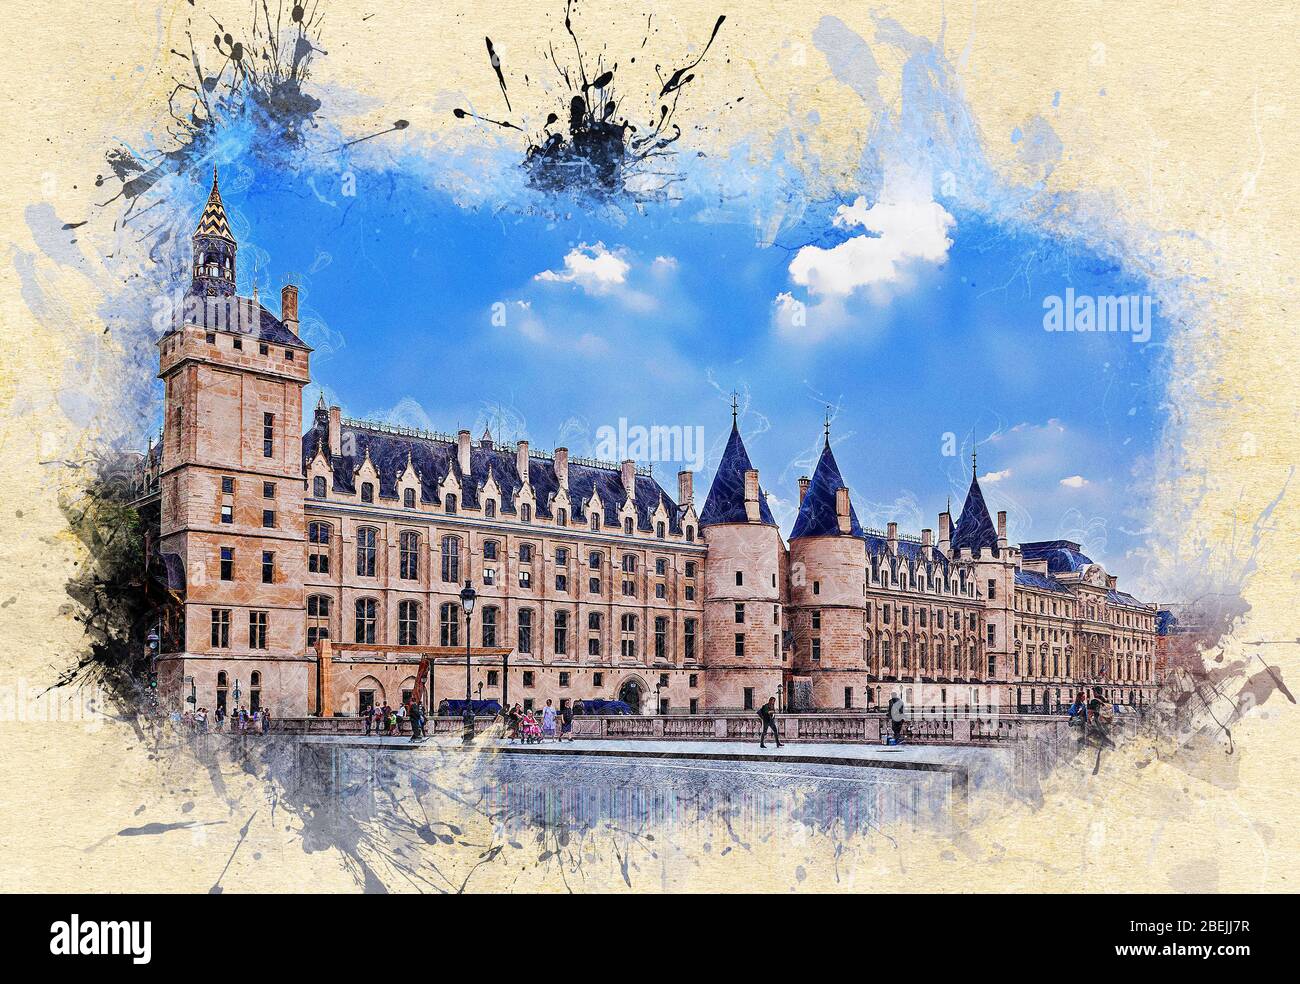 The Conciergerie, a former royal palace and prison. Paris, France. Ink watercolor style. Stock Photo